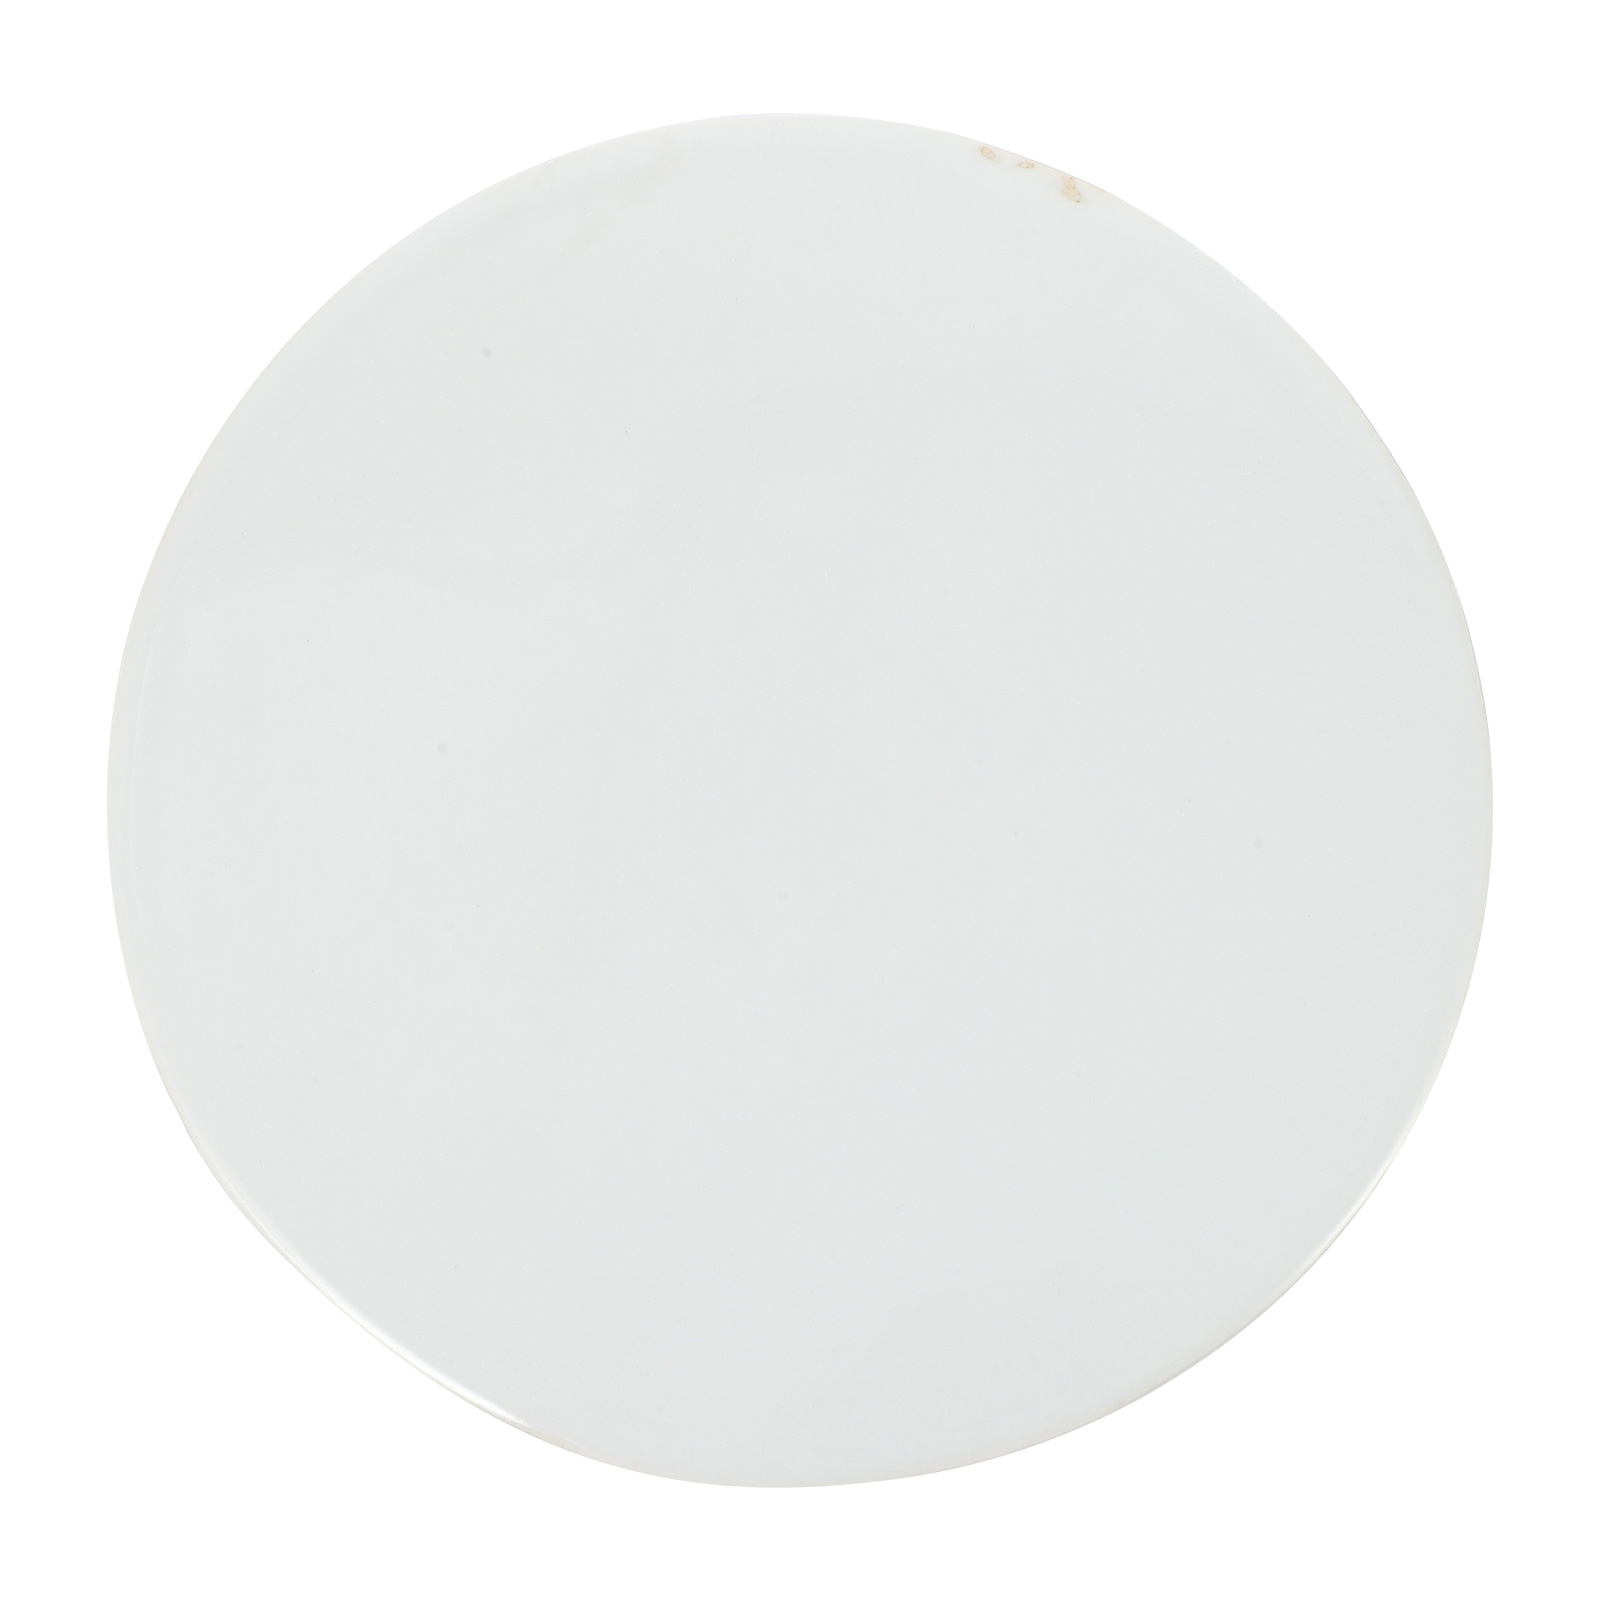 Ceramic Round Tiles Unfinished Plate Coasters Painting Porcelain Plates Blanks Dinner Blank Watercolor - image 1 of 8